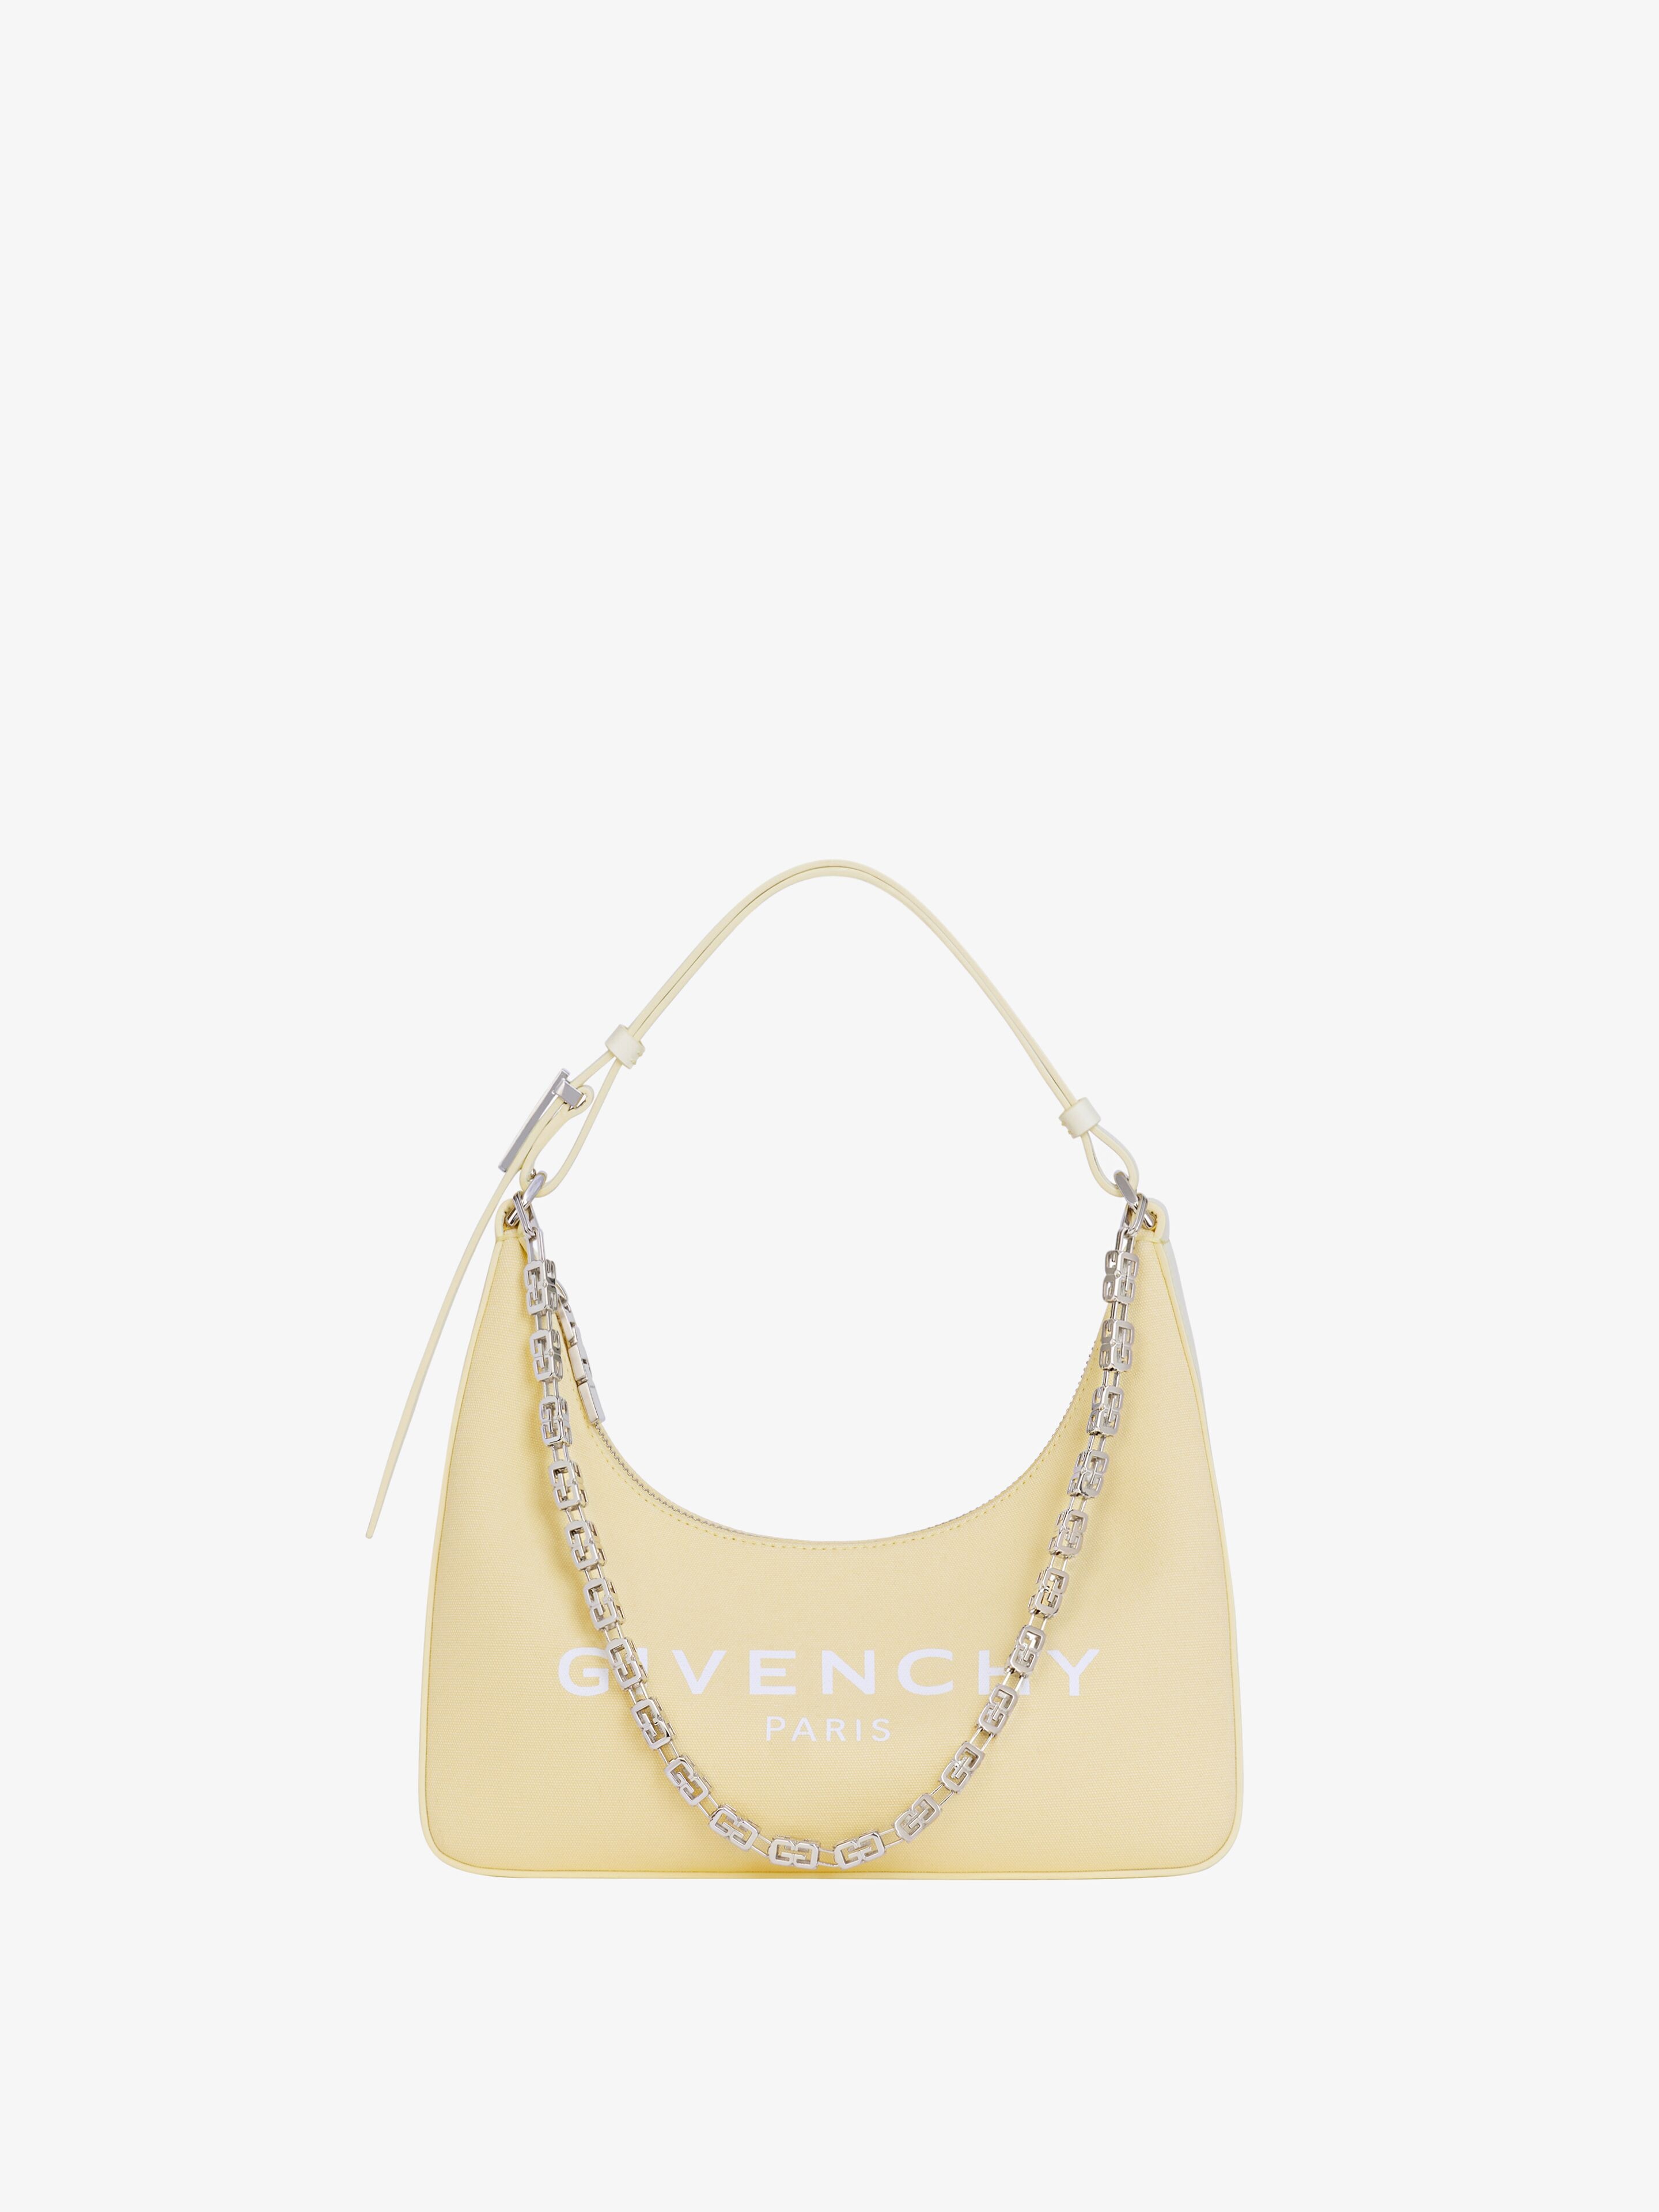 Givenchy Women's Small Moon Cut Out Bag In Canvas With Chain In Pale Yellow